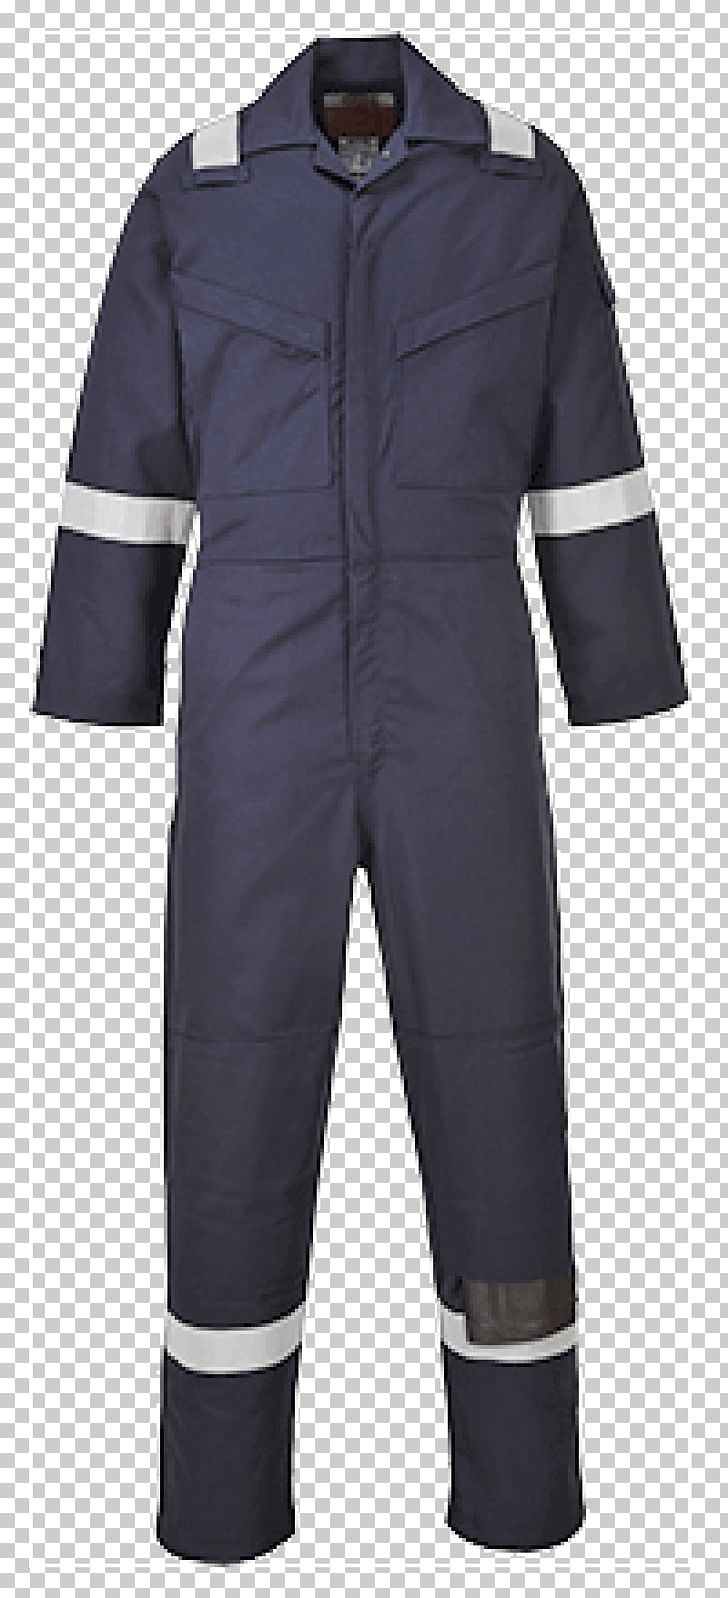 Nomex Boilersuit Flame Retardant Workwear Industry PNG, Clipart, Aberdeen, Aramid, Boilersuit, Clothing, Coverall Free PNG Download